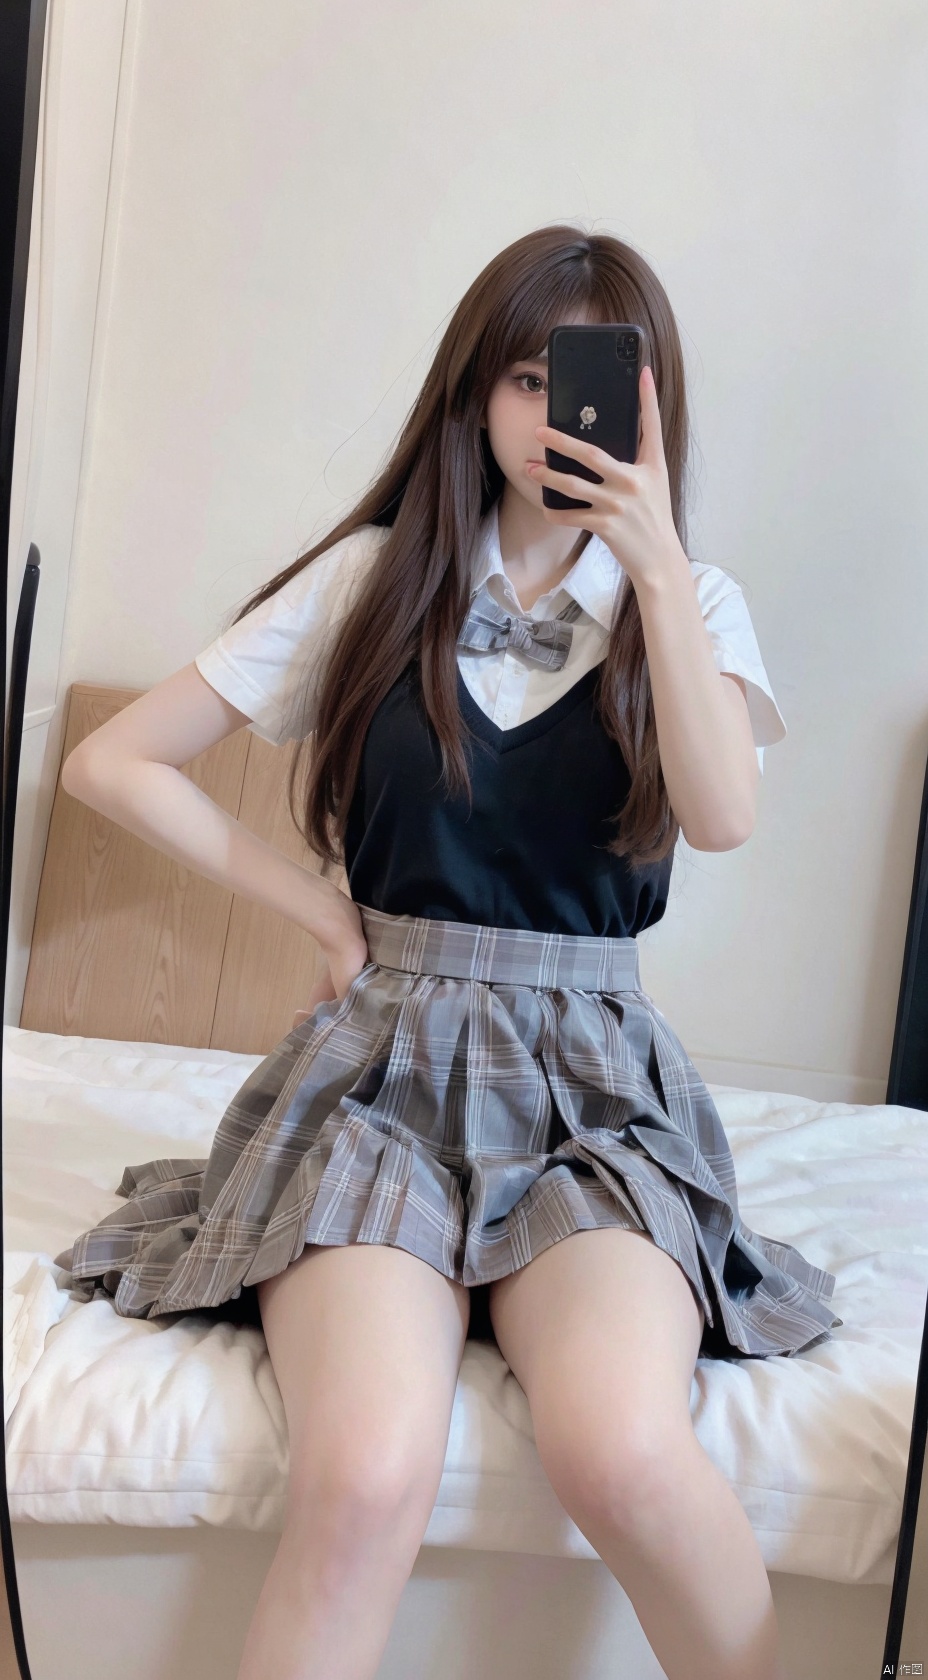  8K,Best quality, 1girl, xtt's body,A photo of oneself taken with a phone in front of a mirror,more details,white mask,full body,long wave hair,school uniform,Wearing blue Pleated skirt, wearing black pantyhose , sitting, ((Mobile selfie perspective)), shapely body,midnight, xtt, aki, spread legs_vagxxx